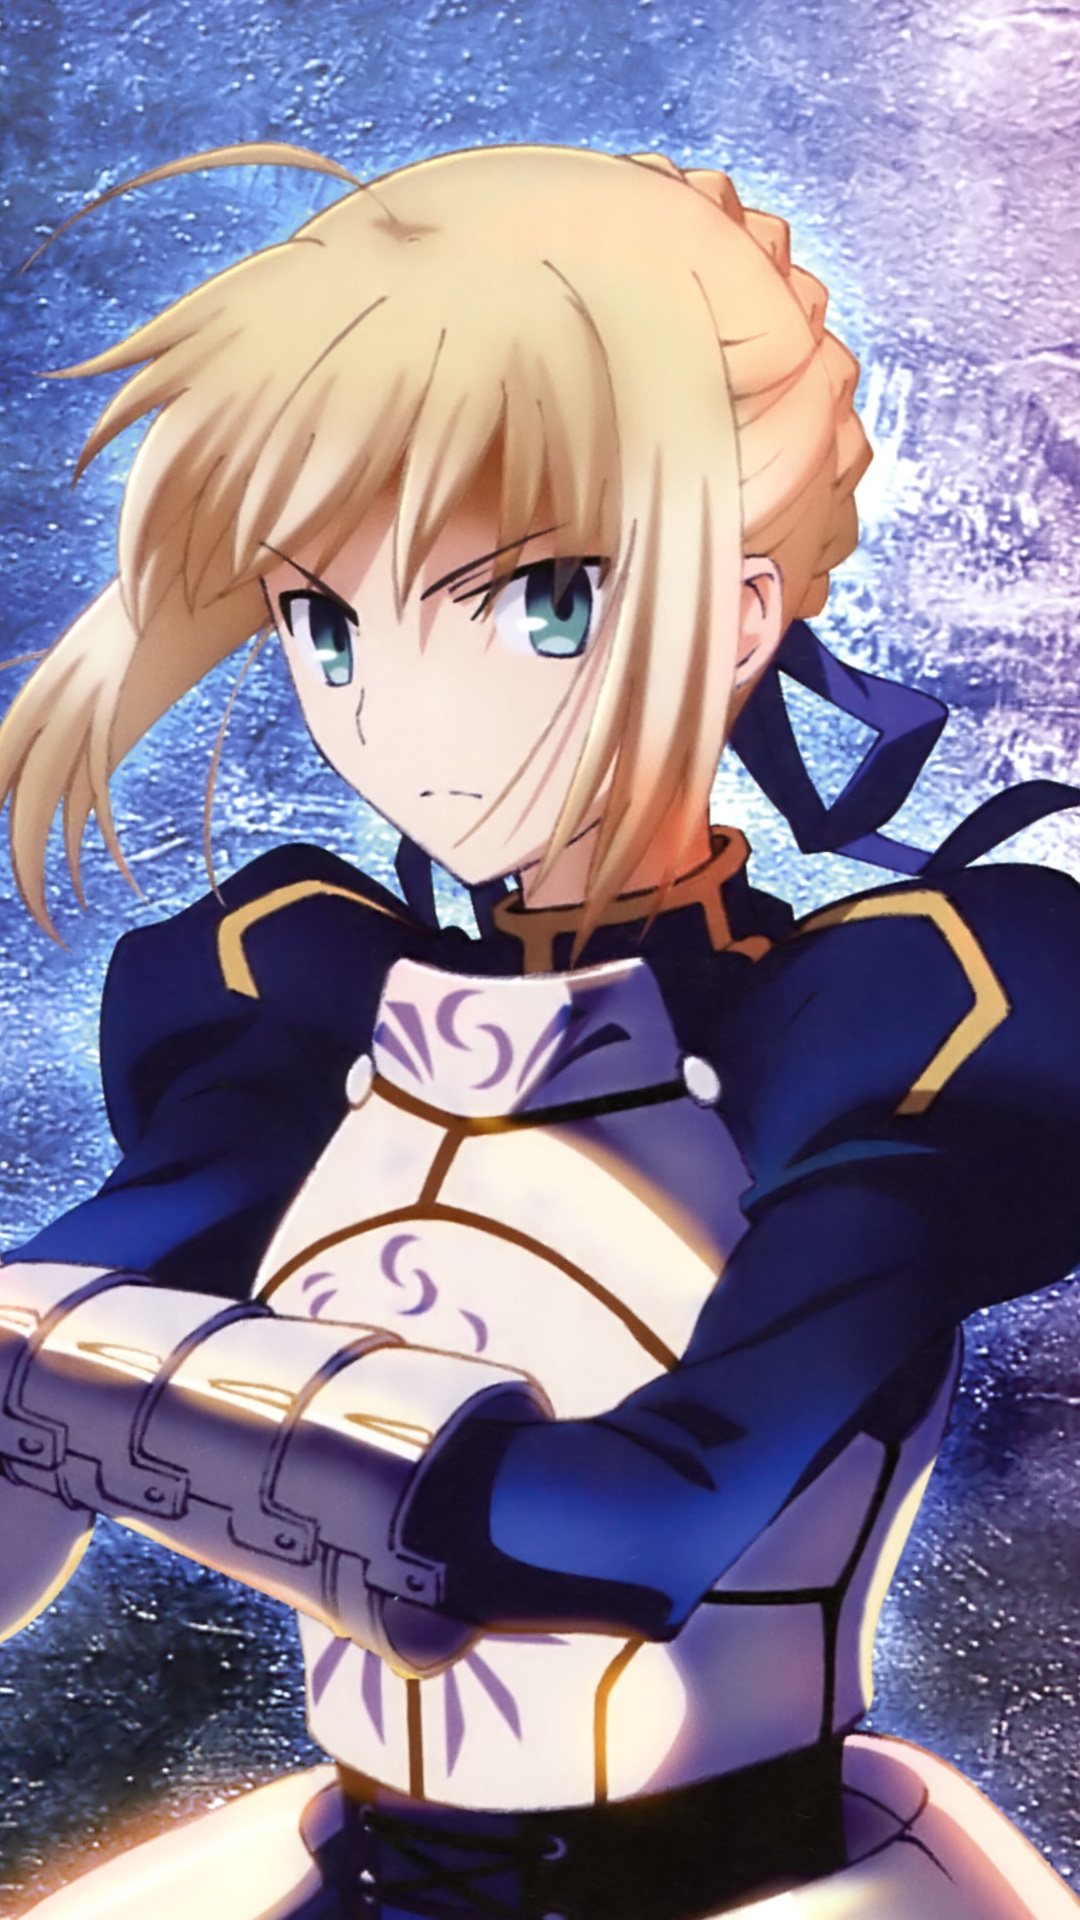 Fate Stay Night Unlimited Blade Works Saber Sony Xperia Z Wallpaper 1080 19 Kawaii Mobile